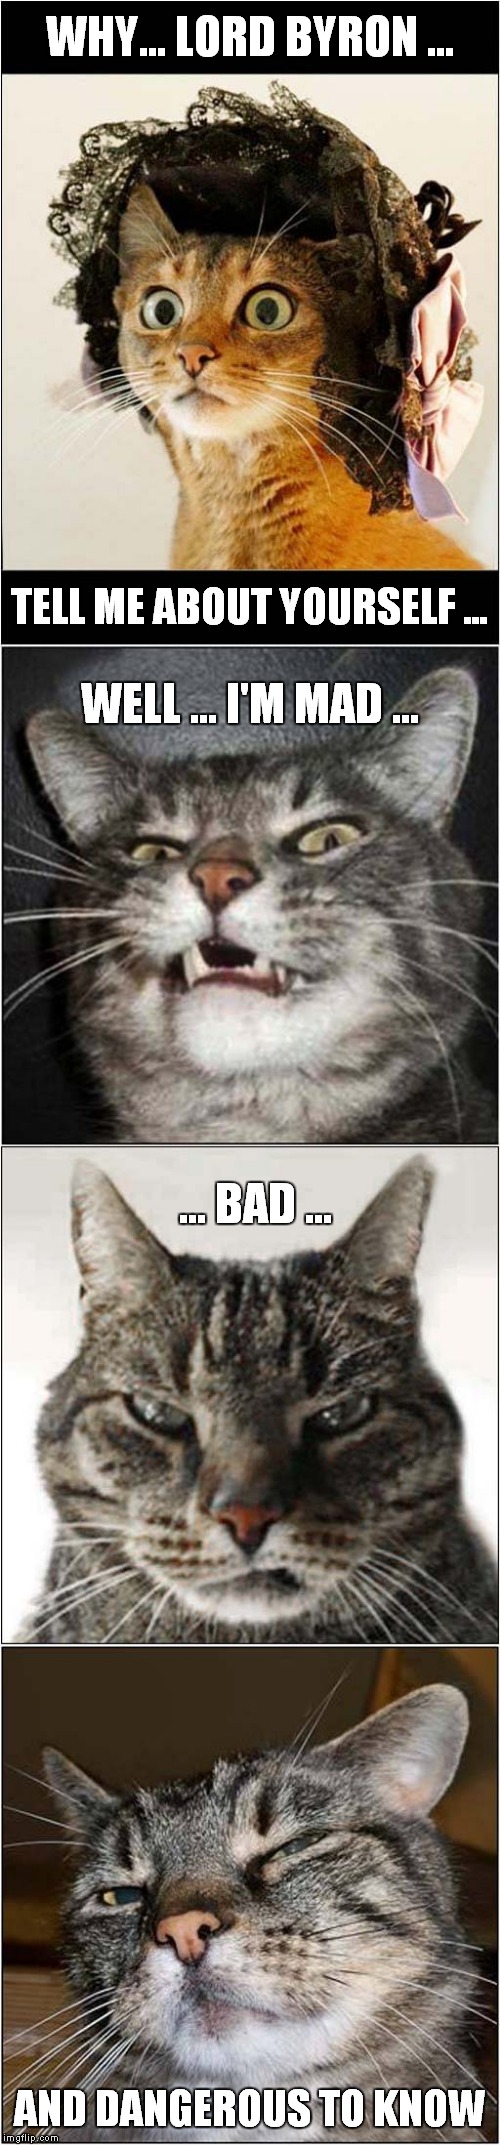 Mad, Bad and Dangerous Cat | WHY... LORD BYRON ... TELL ME ABOUT YOURSELF ... WELL ... I'M MAD ... ... BAD ... AND DANGEROUS TO KNOW | image tagged in fun,cats,lady caroline lamb,lord byron,1812 | made w/ Imgflip meme maker